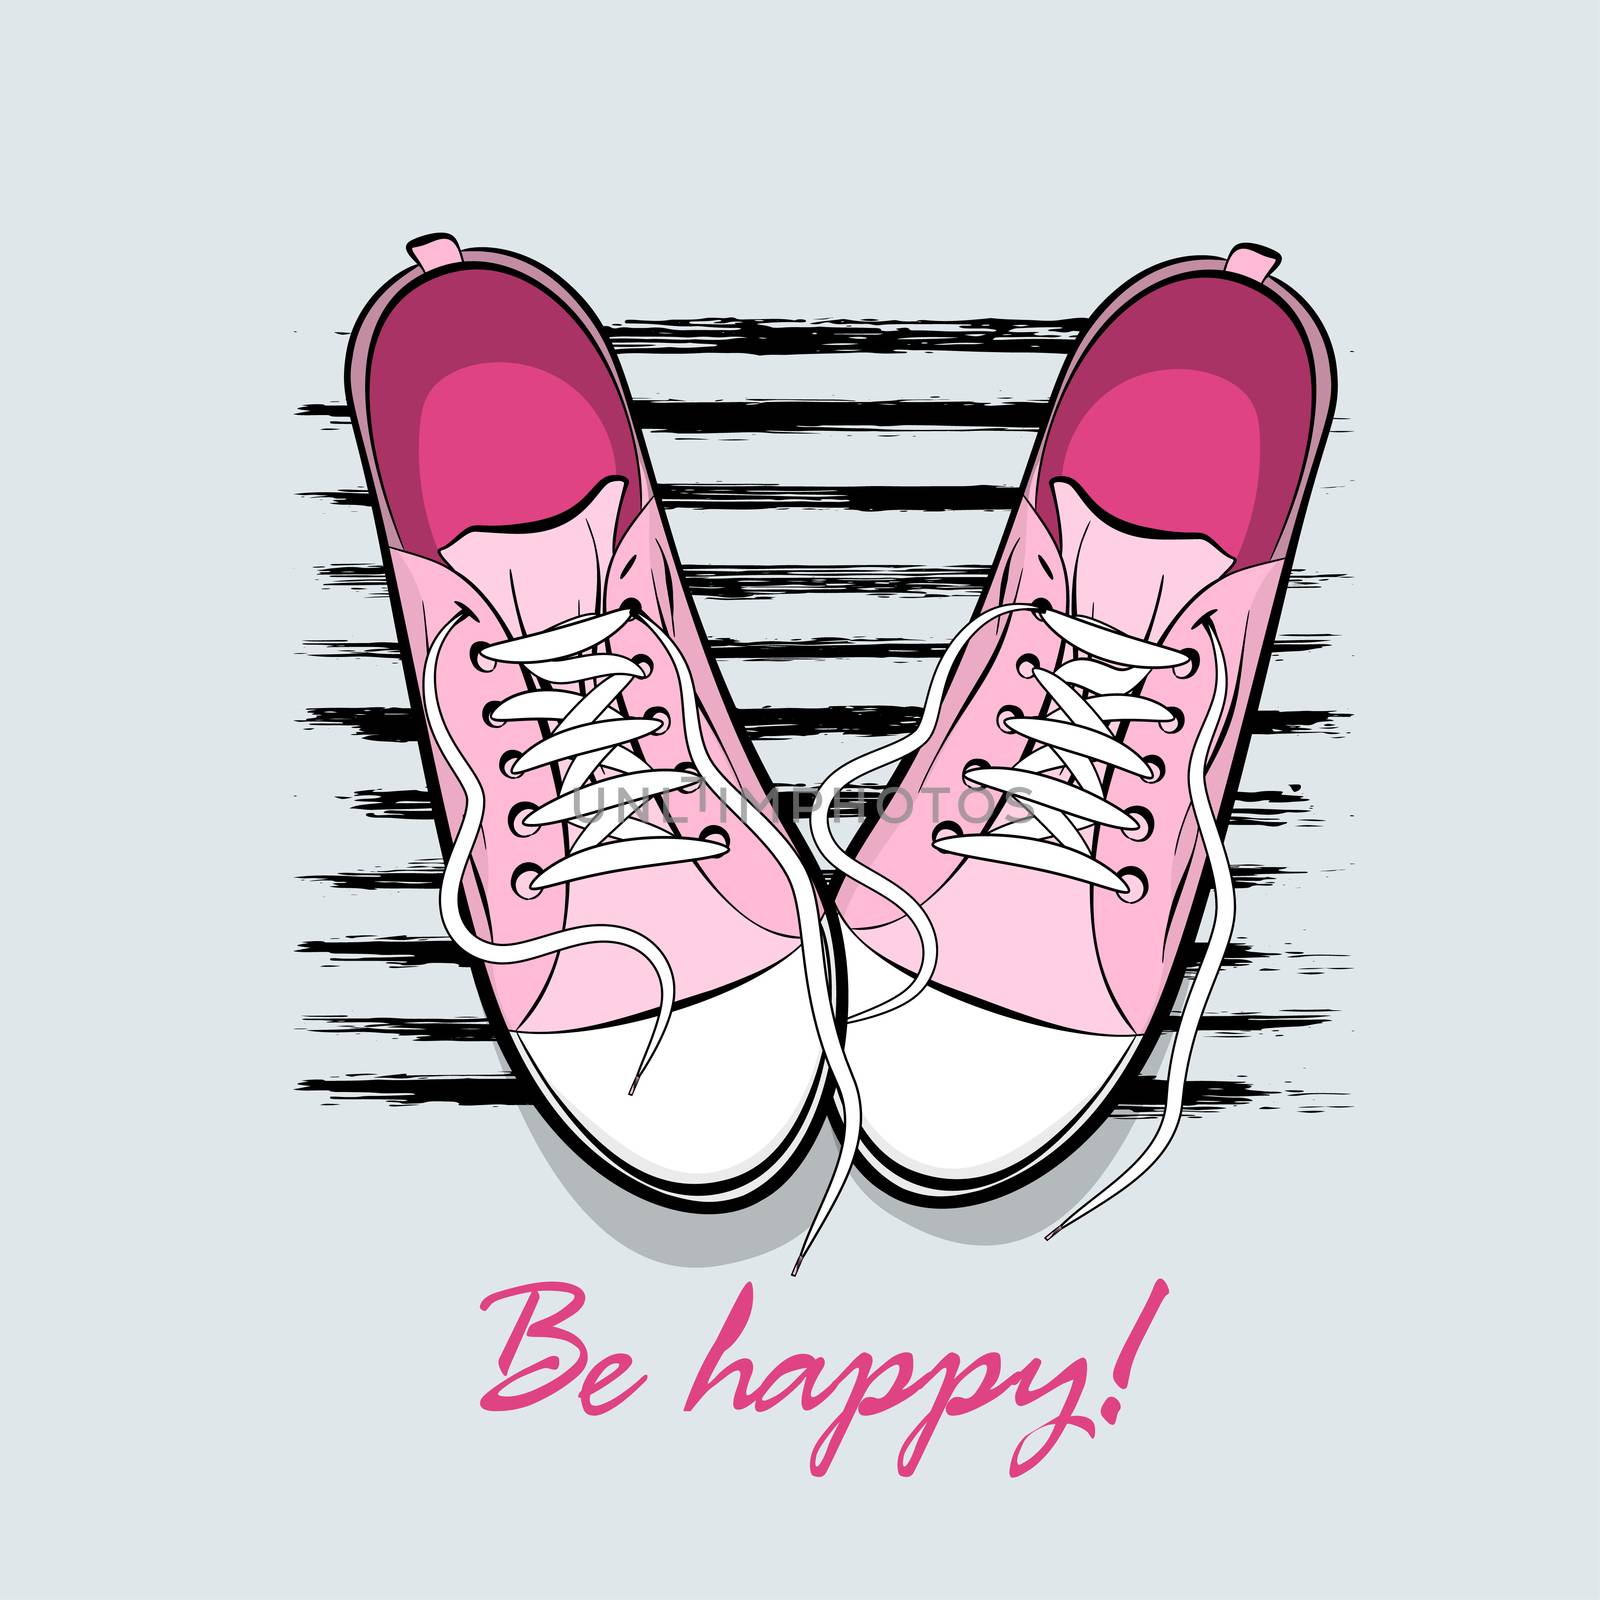 Be happy printable poster. Youth young trendy fashion. Pop art drawing sneakers shoes. Kitsch colored comic text background. Pair sporty shoes.